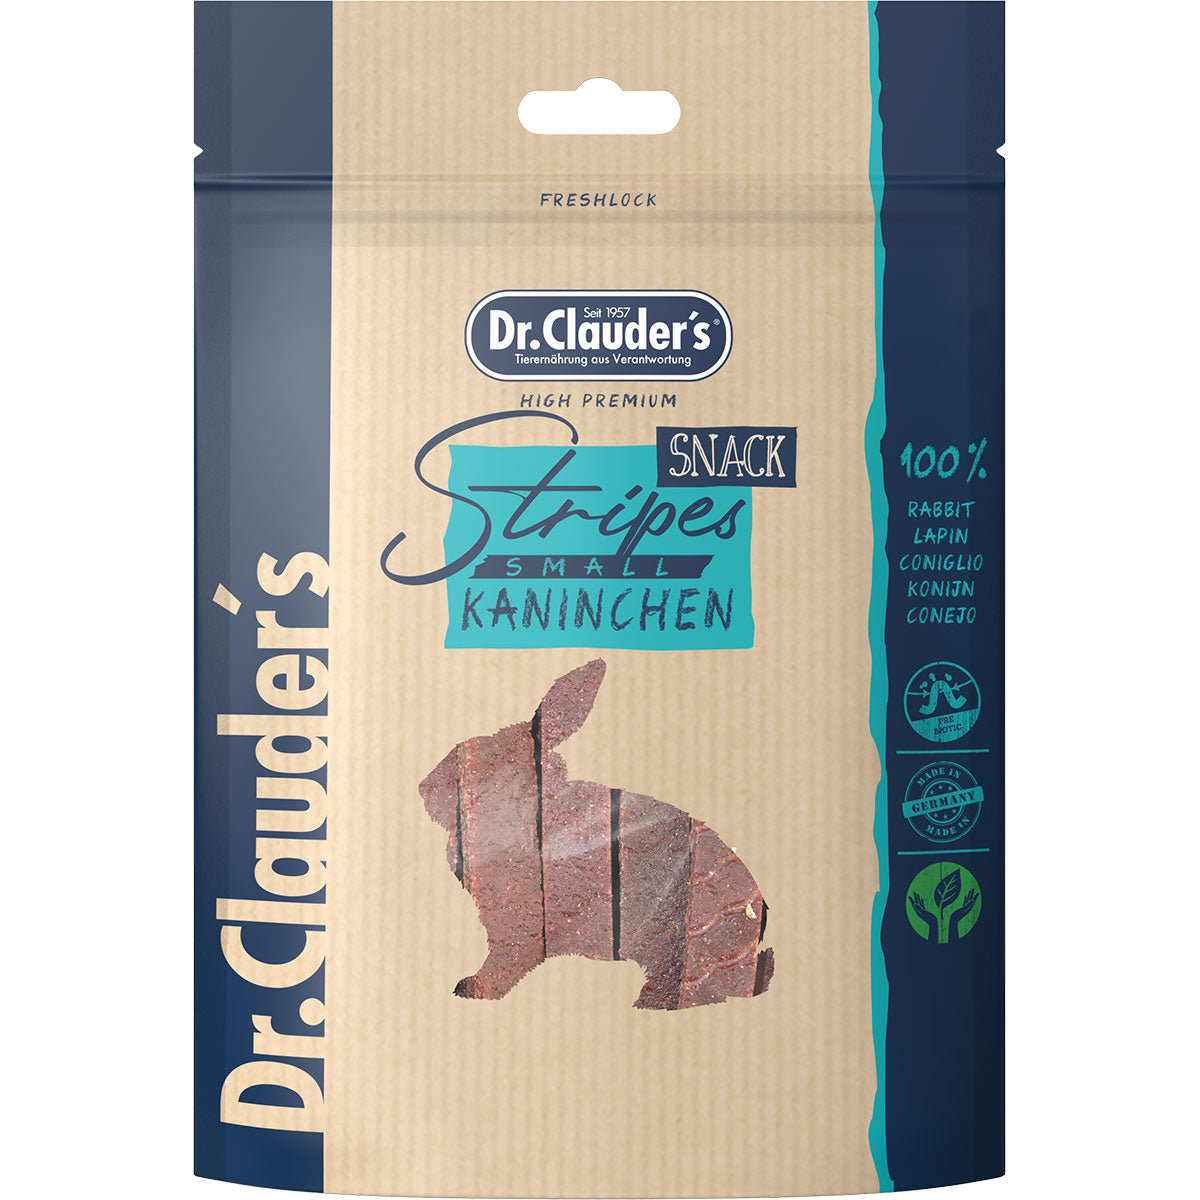 Dr. Clauders Snack Stripes Kaninchen, Small, 80g